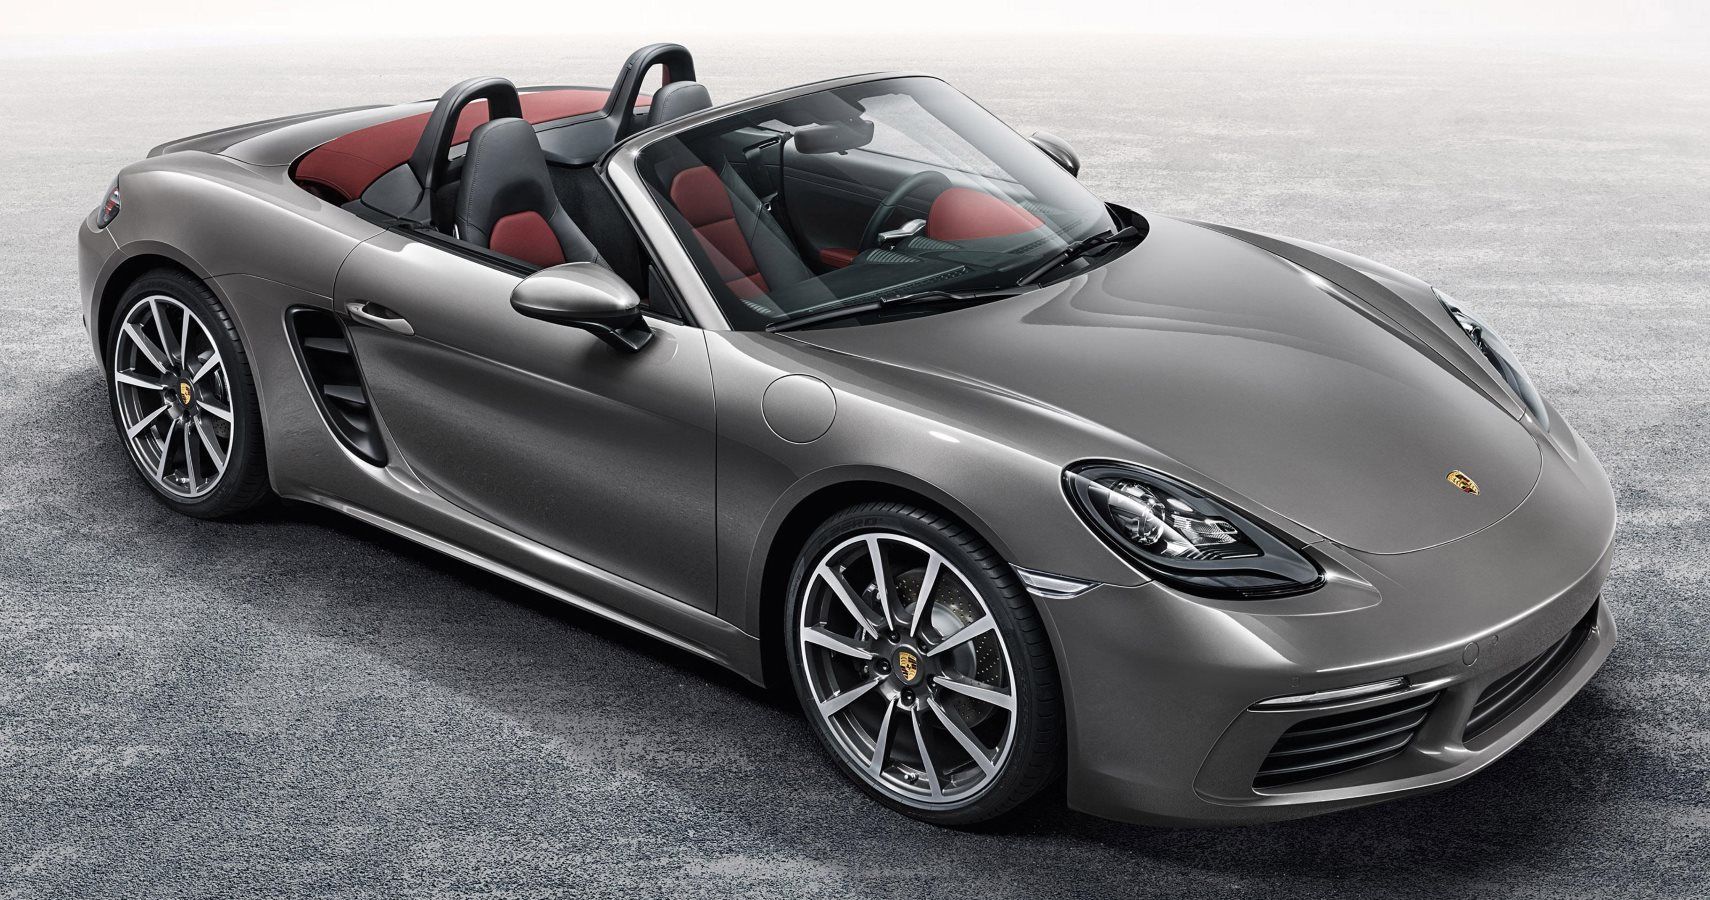 Porsche 718 Boxster Spyder Photographed With Convertible Roof